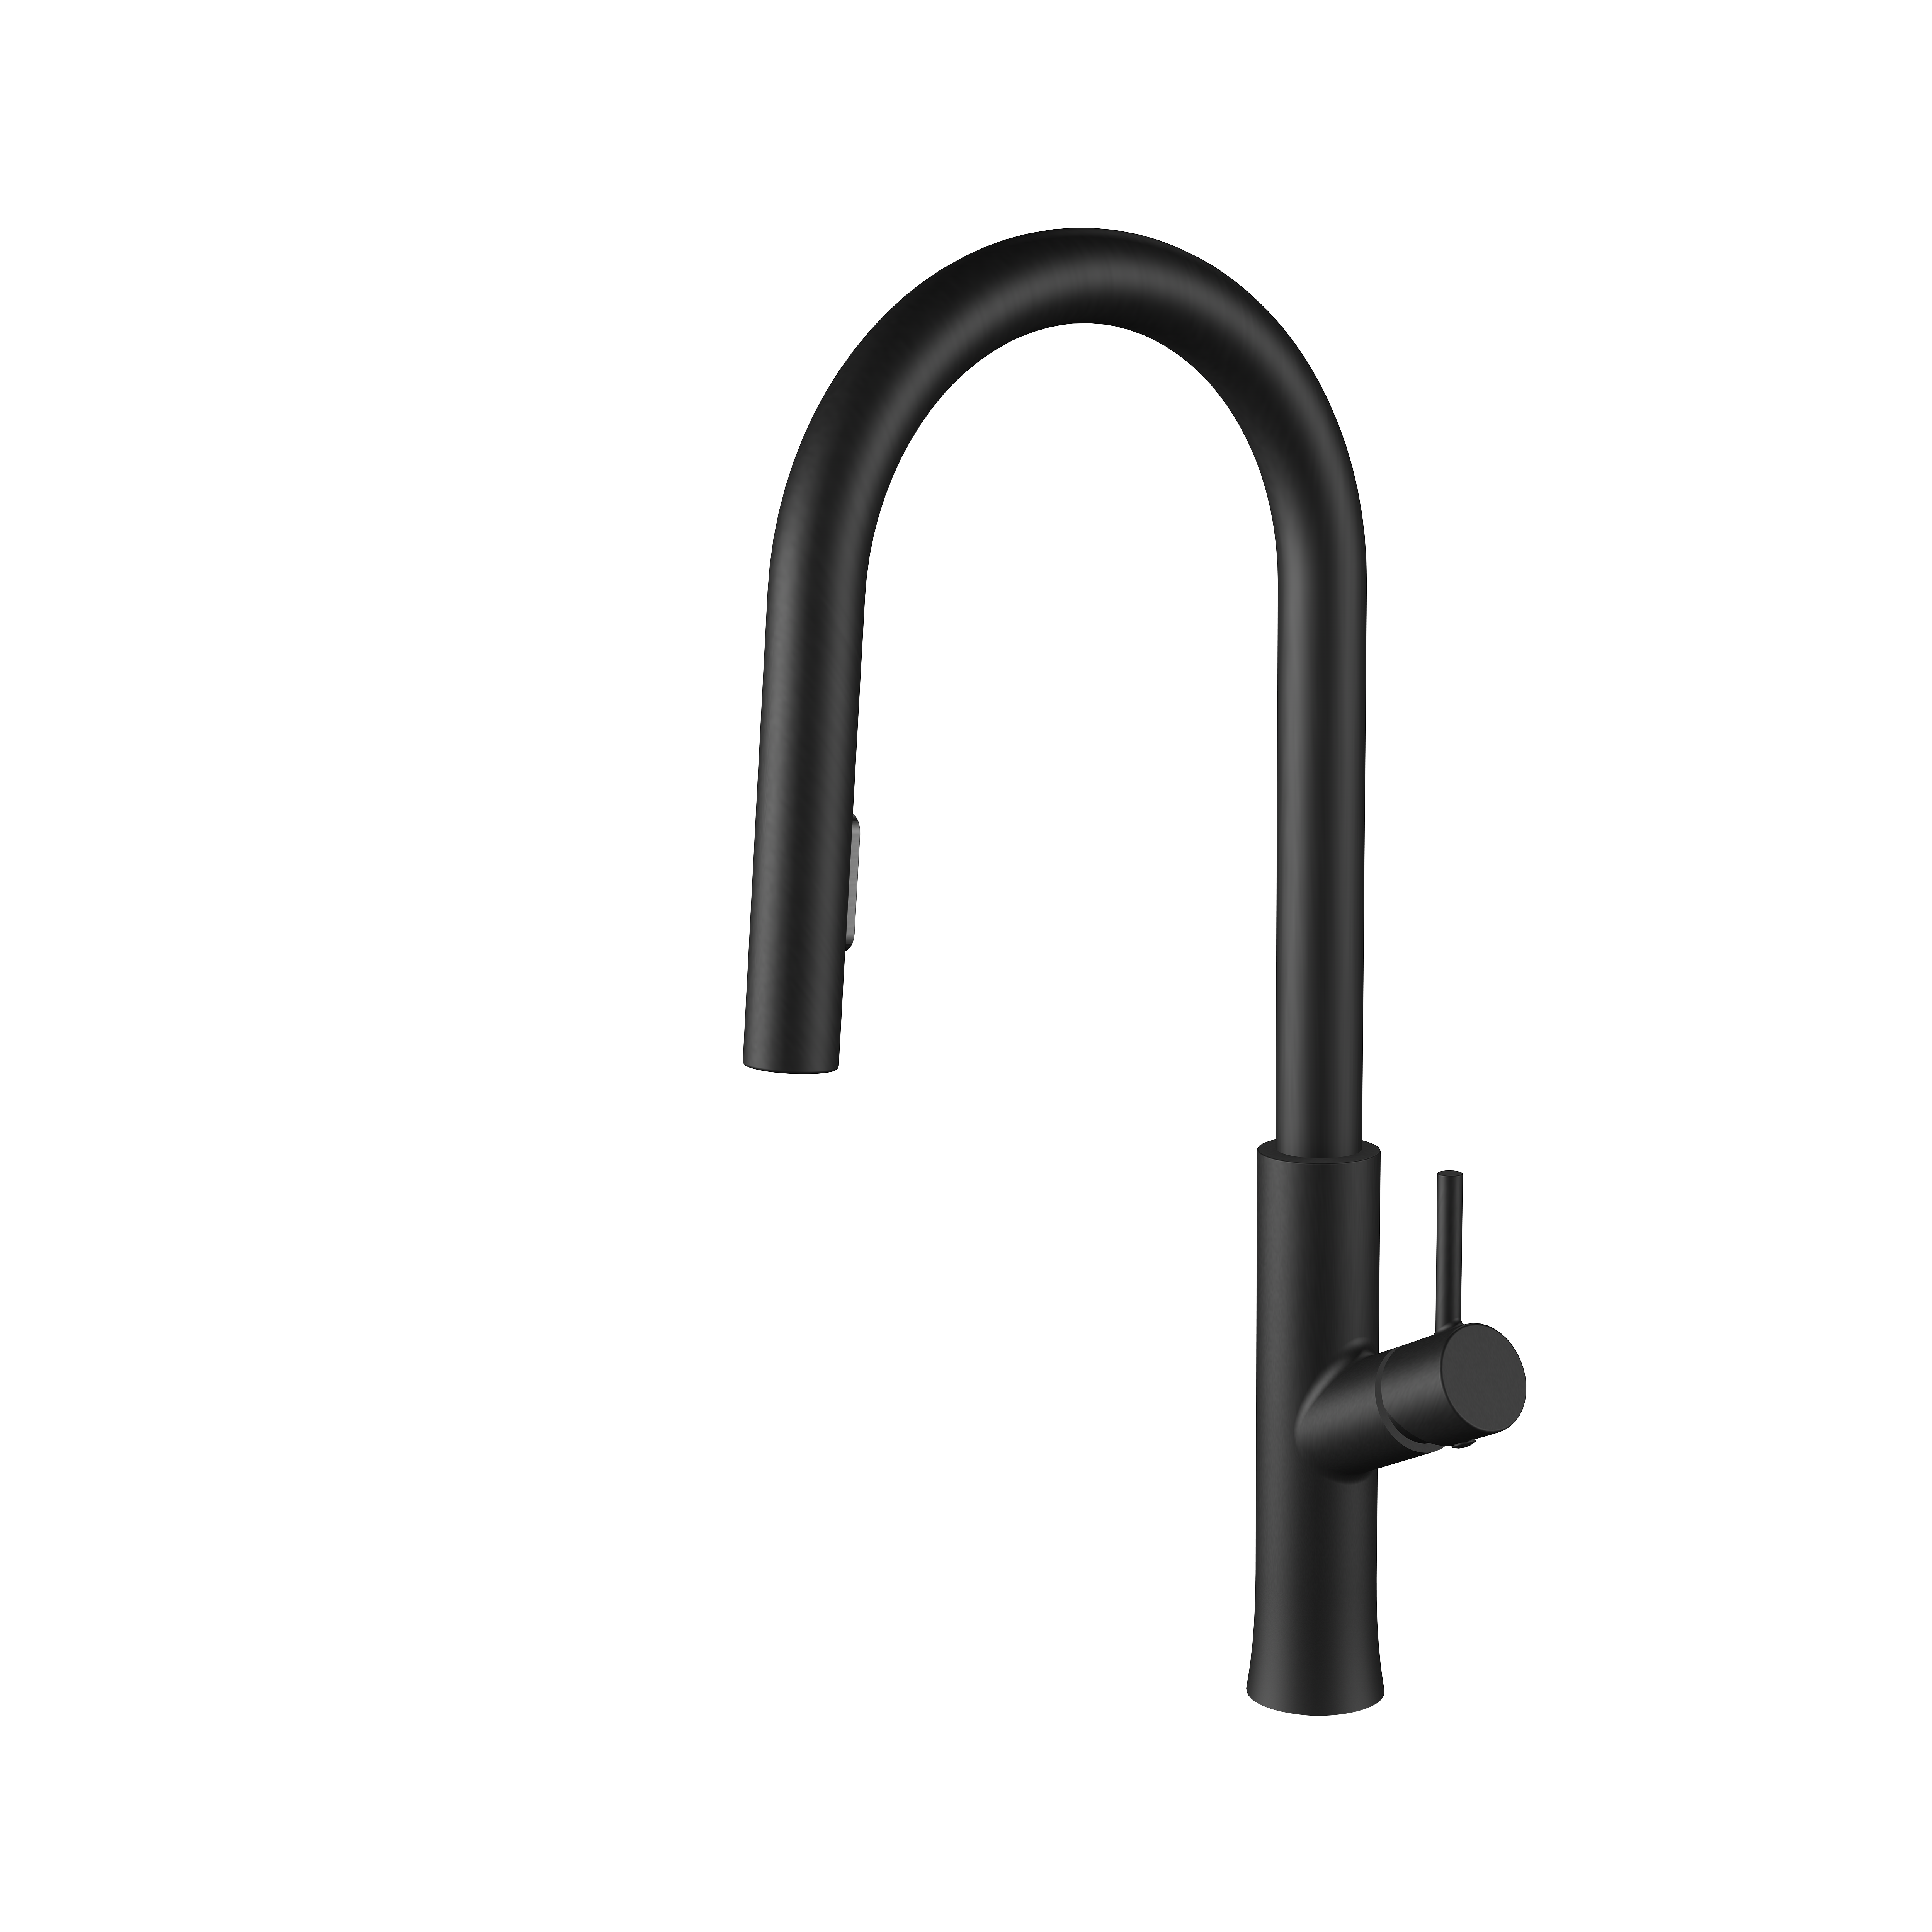 Outstanding Single Handle Kitchen Faucet with Good Quality